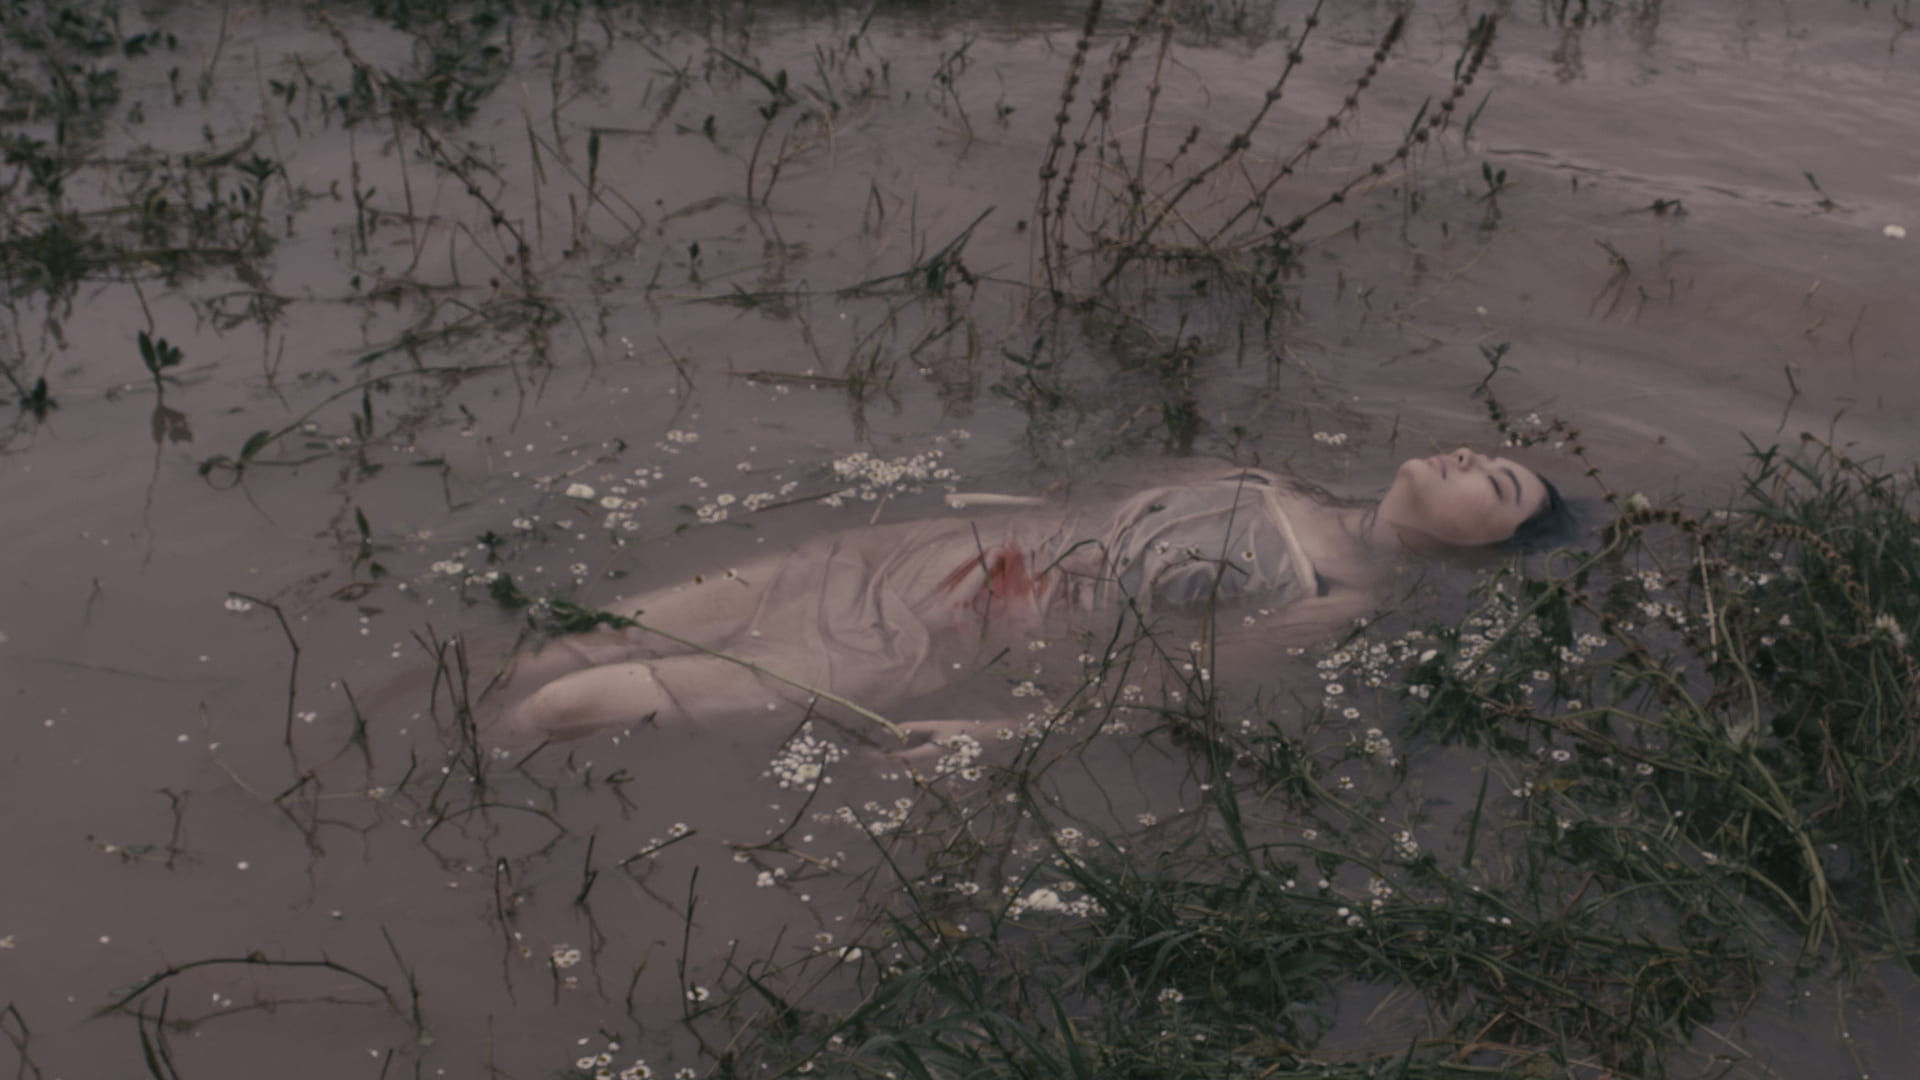 An image of a person in a body of water in a dress with a wound.